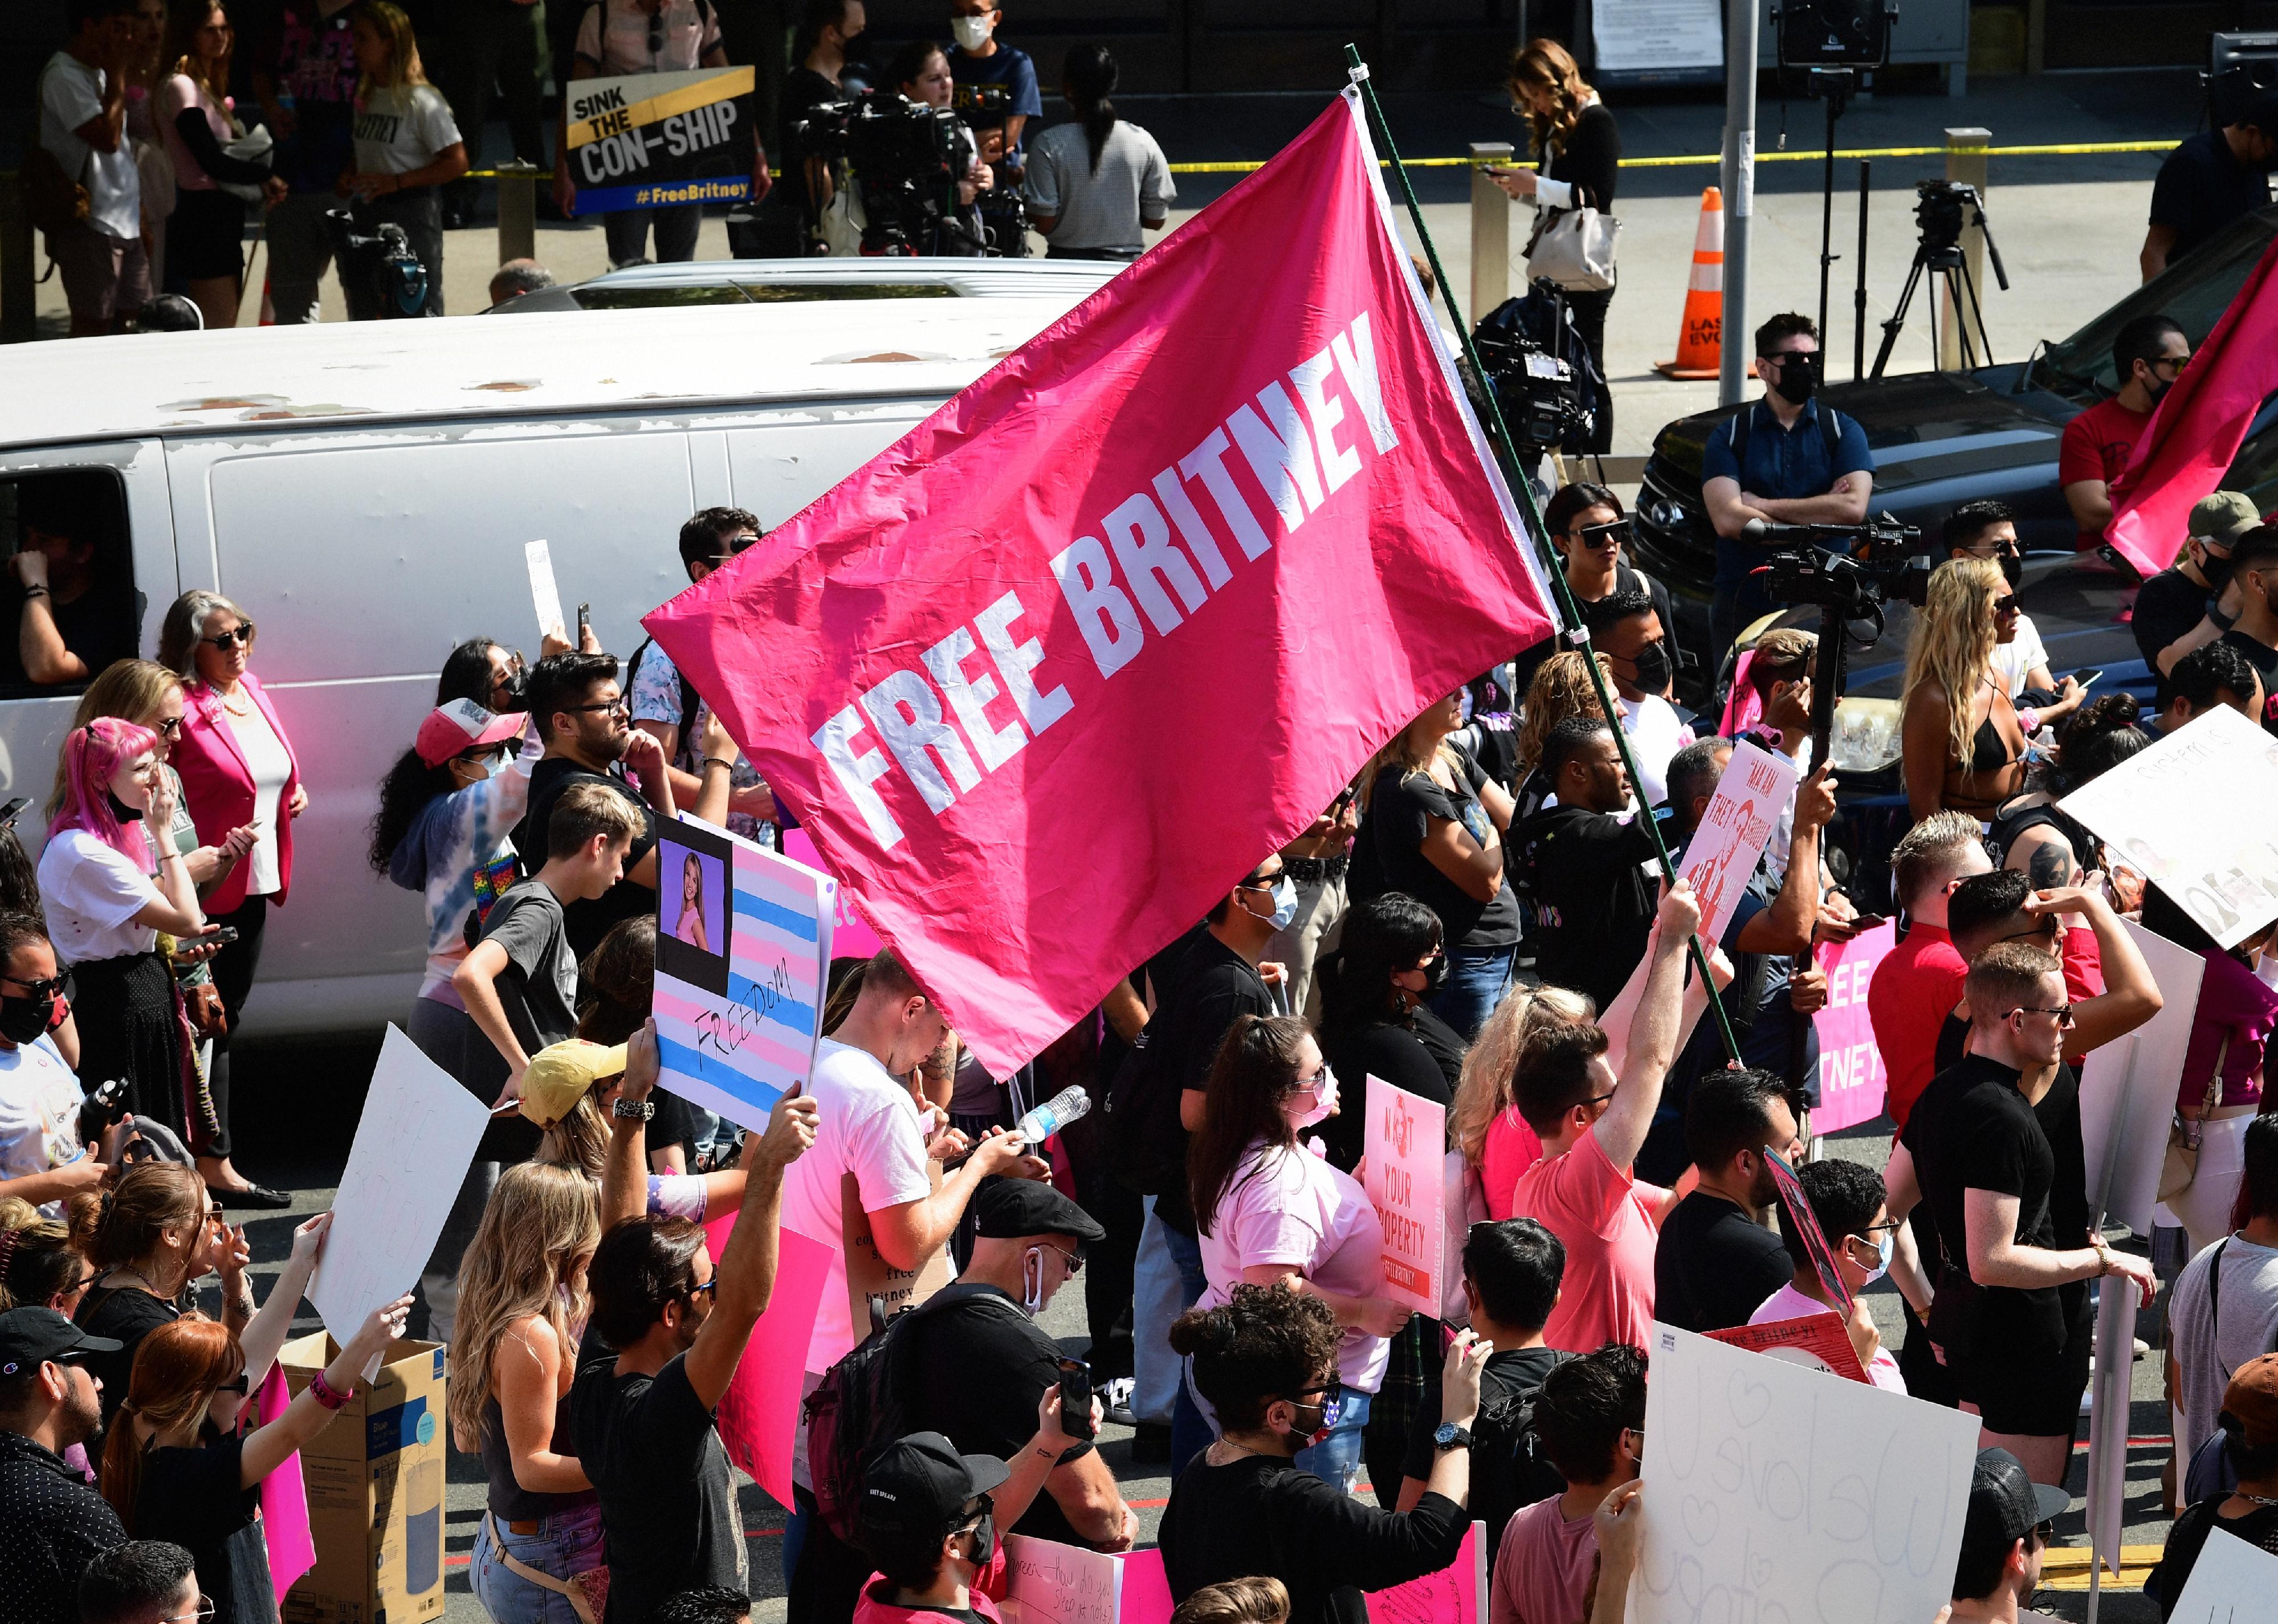 #FreeBritney activists protest during a rally.